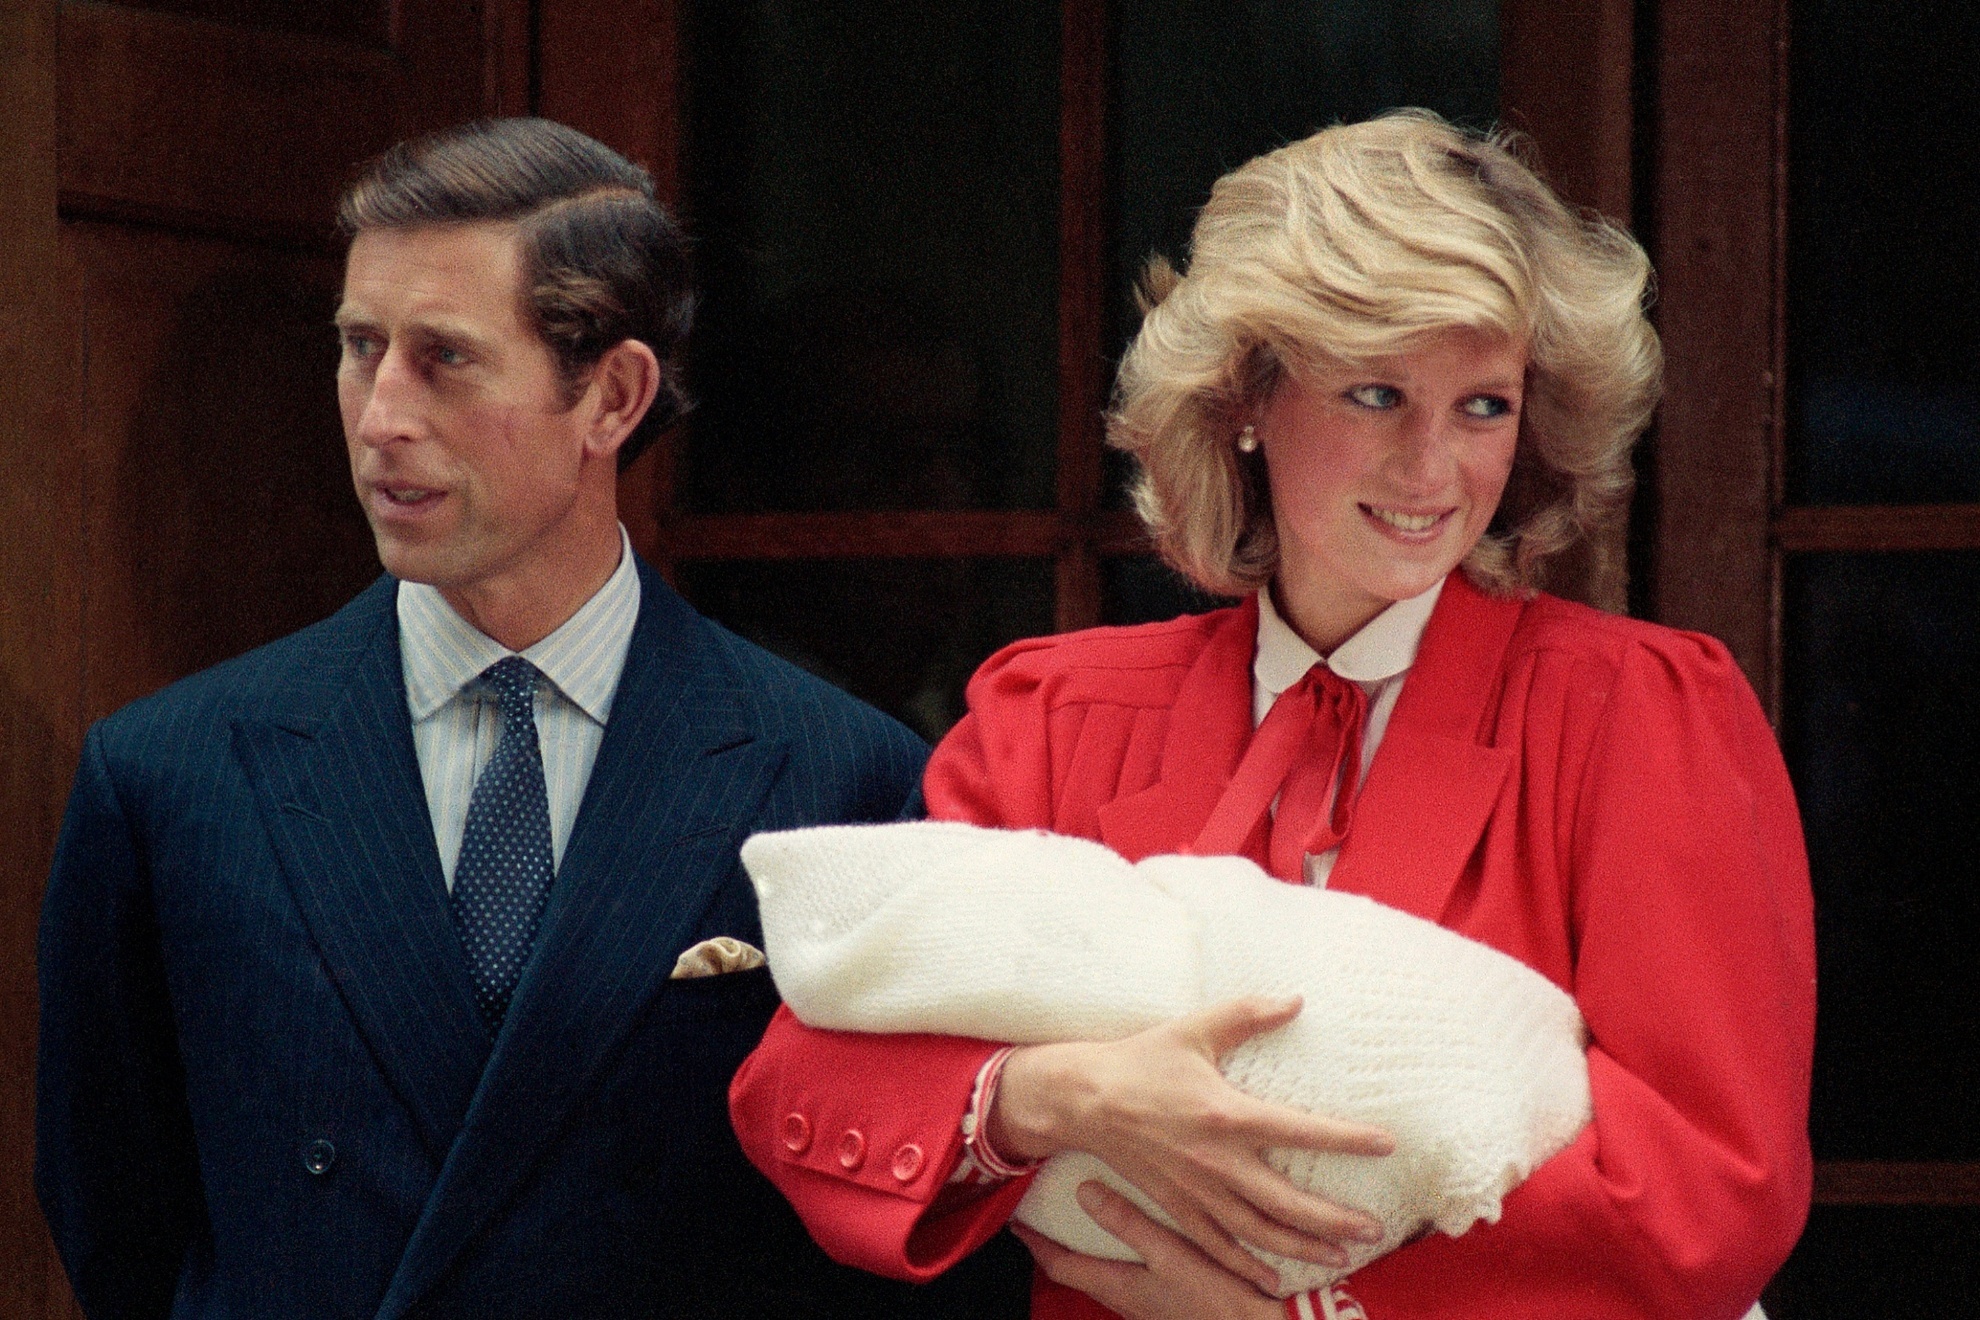 The Prince and Princess of Wales, Charles and Diana, on Sept. 16, 1984 with their new baby son, Prince Harry.